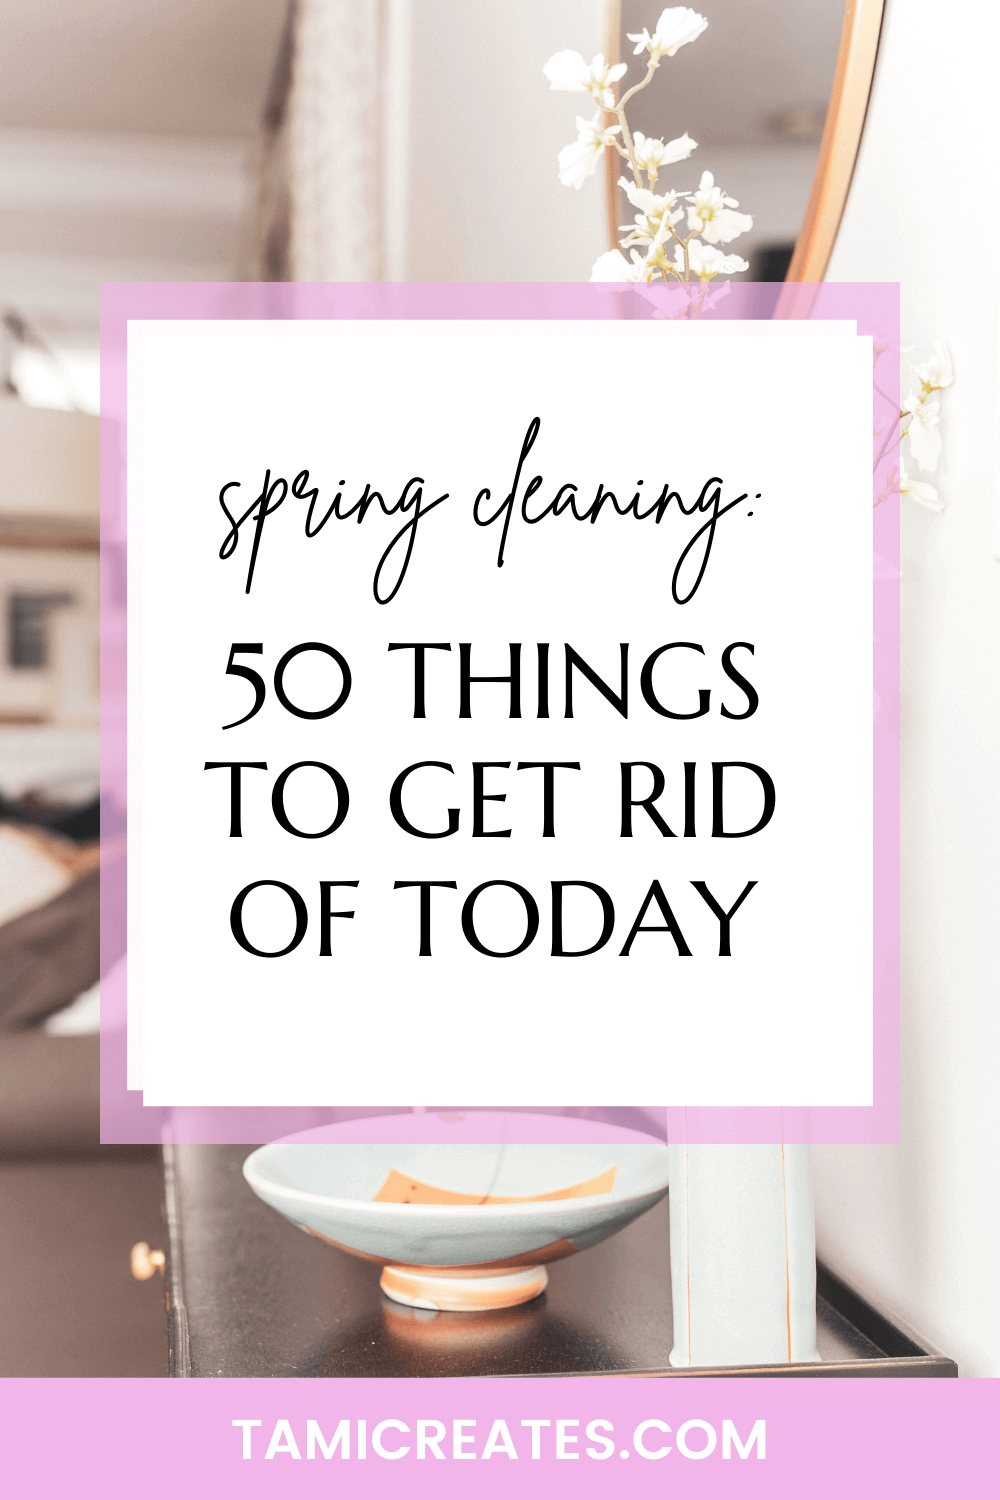 Any time is a great time for decluttering. Here are 50 things to get rid of today to free up space for what matters in your life and environment!